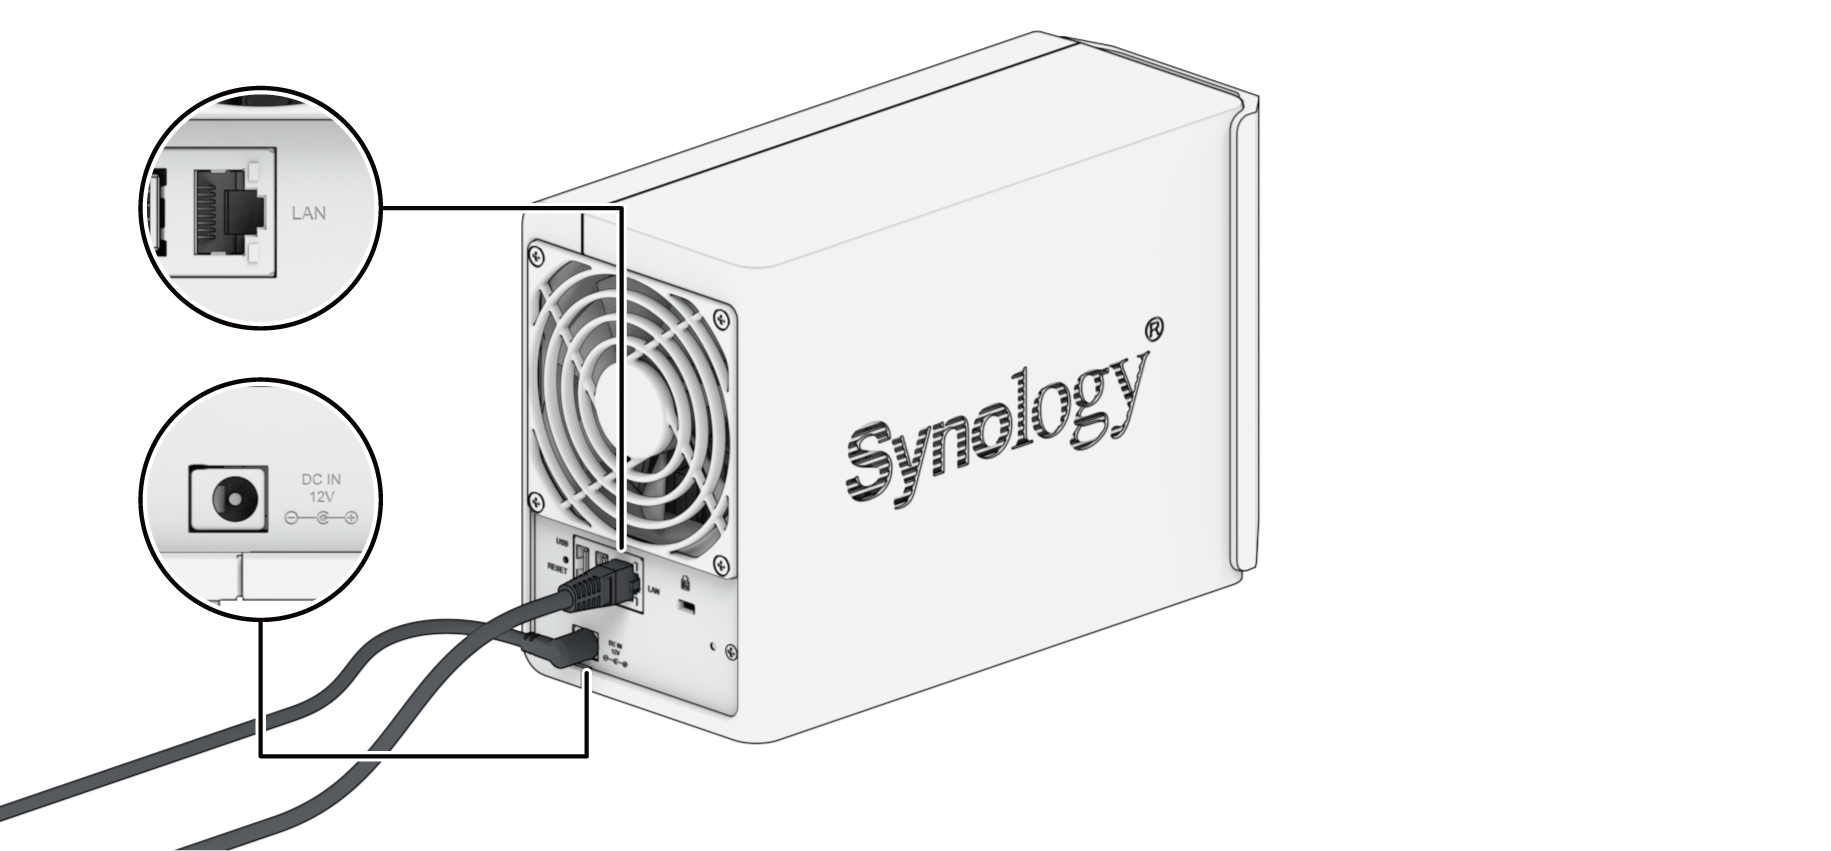 Setting up a Synology DS223 NAS - Mighty Capable